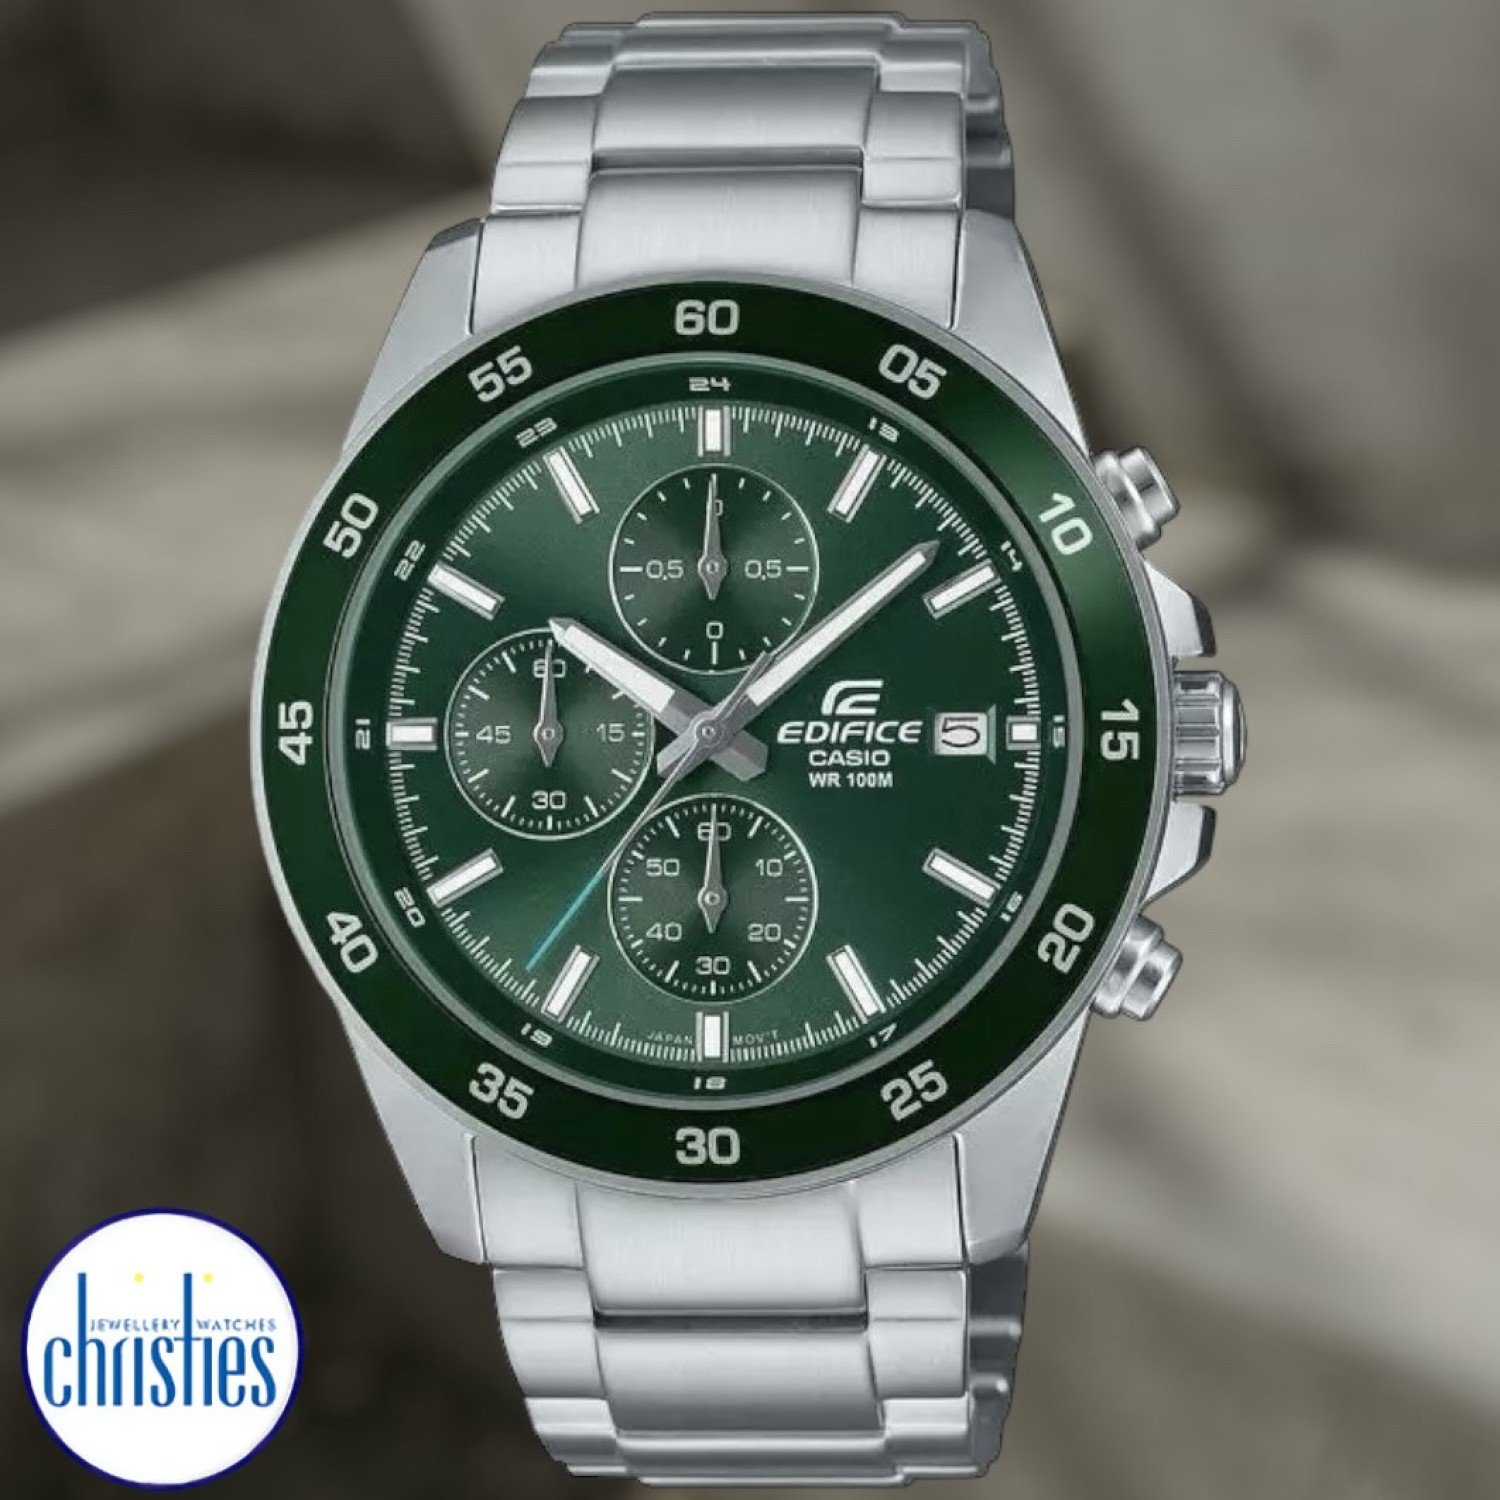 EFR526D-3A Casio Edifice Standard Chronograph EFR526D-3A Casio New Zealand and Auckland - Free Delivery - Afterpay, Layby the easy way to pay - Cheap Casio Watches Auckland